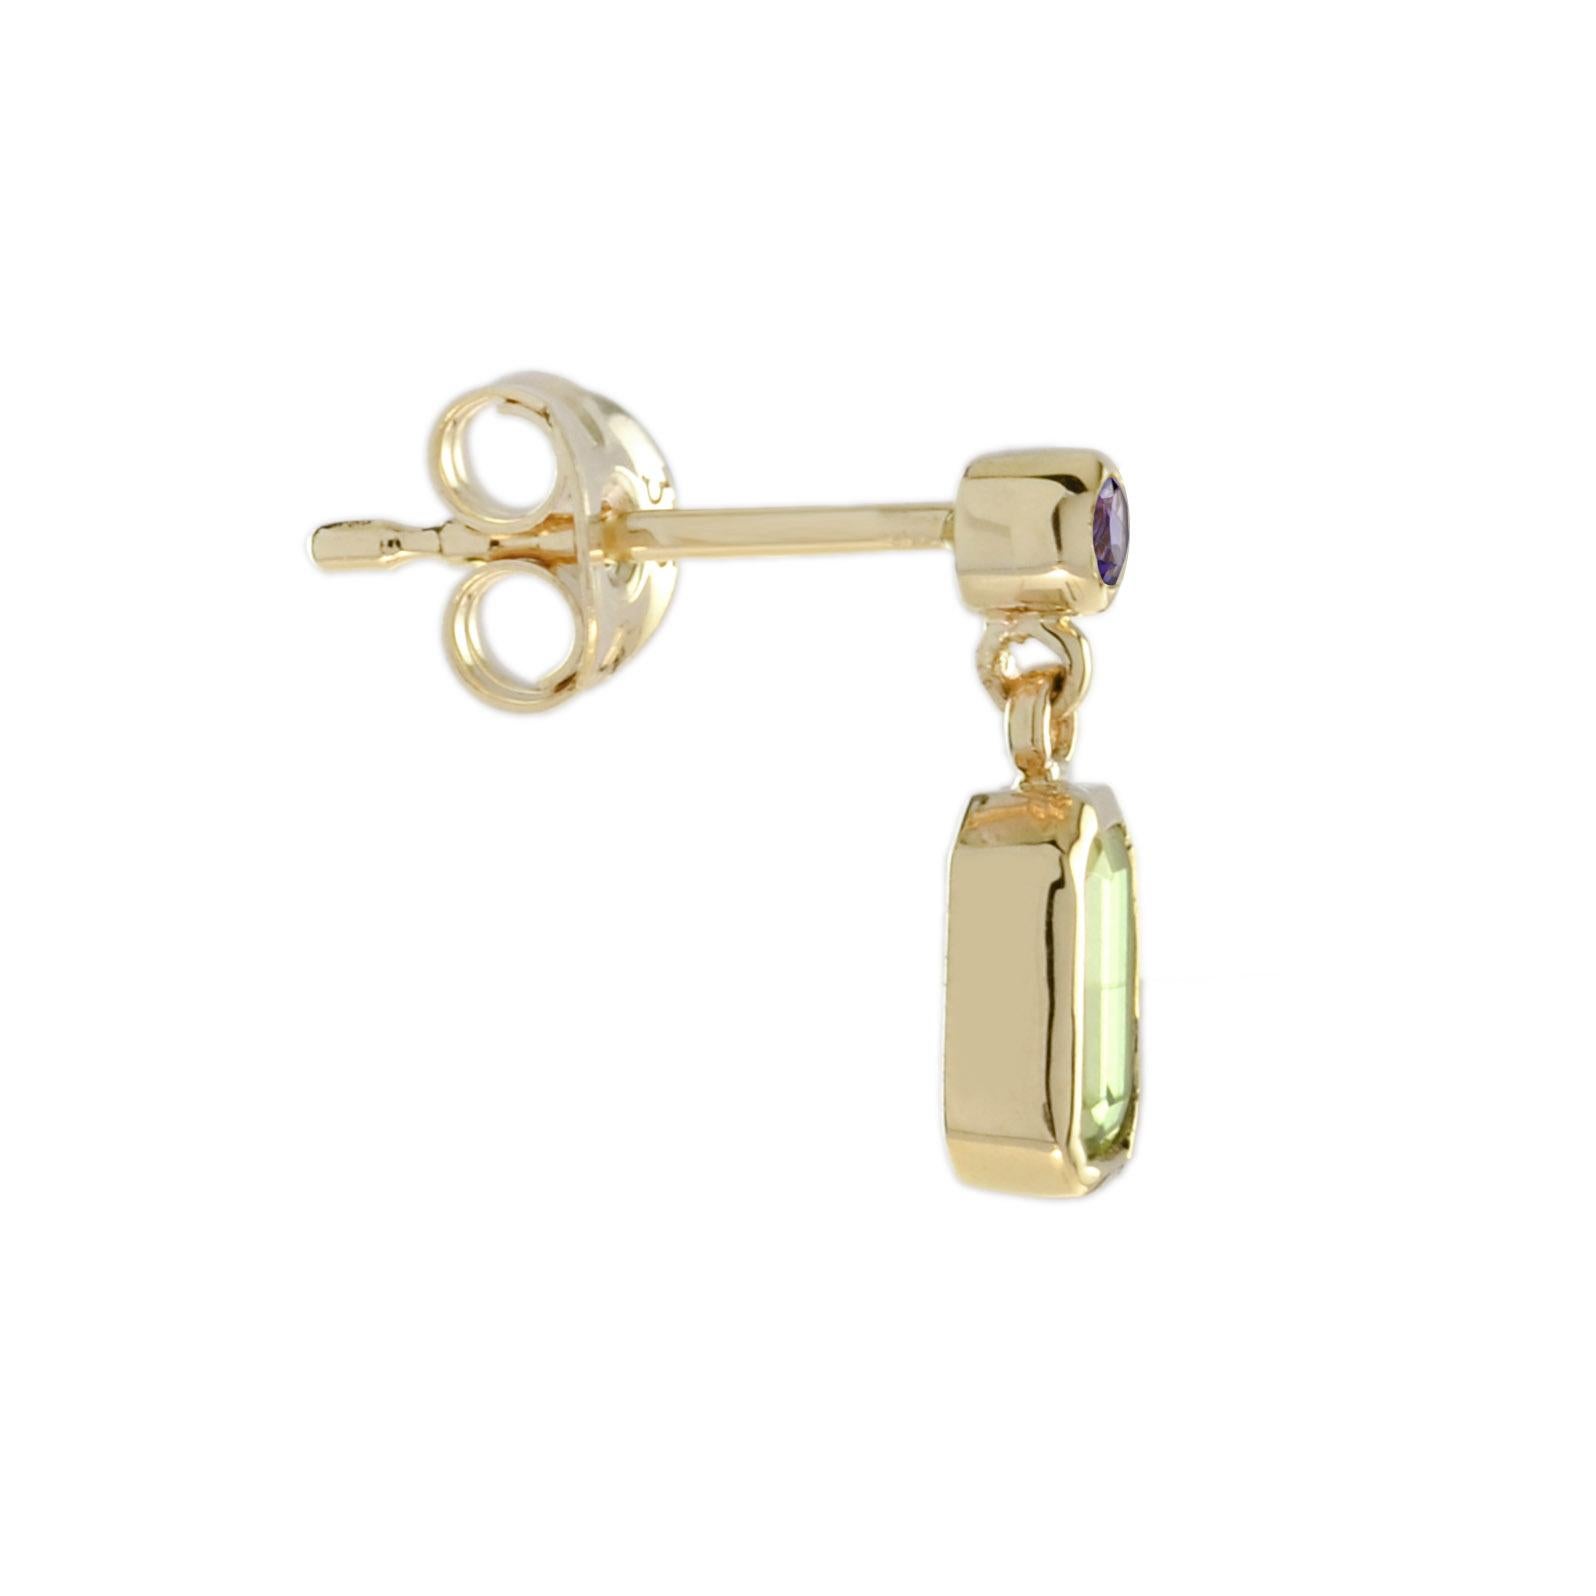 A lovely pair of 1.20-carat emerald cut peridots suspended from two pearls set in 14k yellow gold. An effortless upgrade to your accessary wardrobe. 

Earrings Information
Style: Vintage
Metal: 14K Yellow Gold
Width: 4.5 mm.
Length: 12 mm.
Total